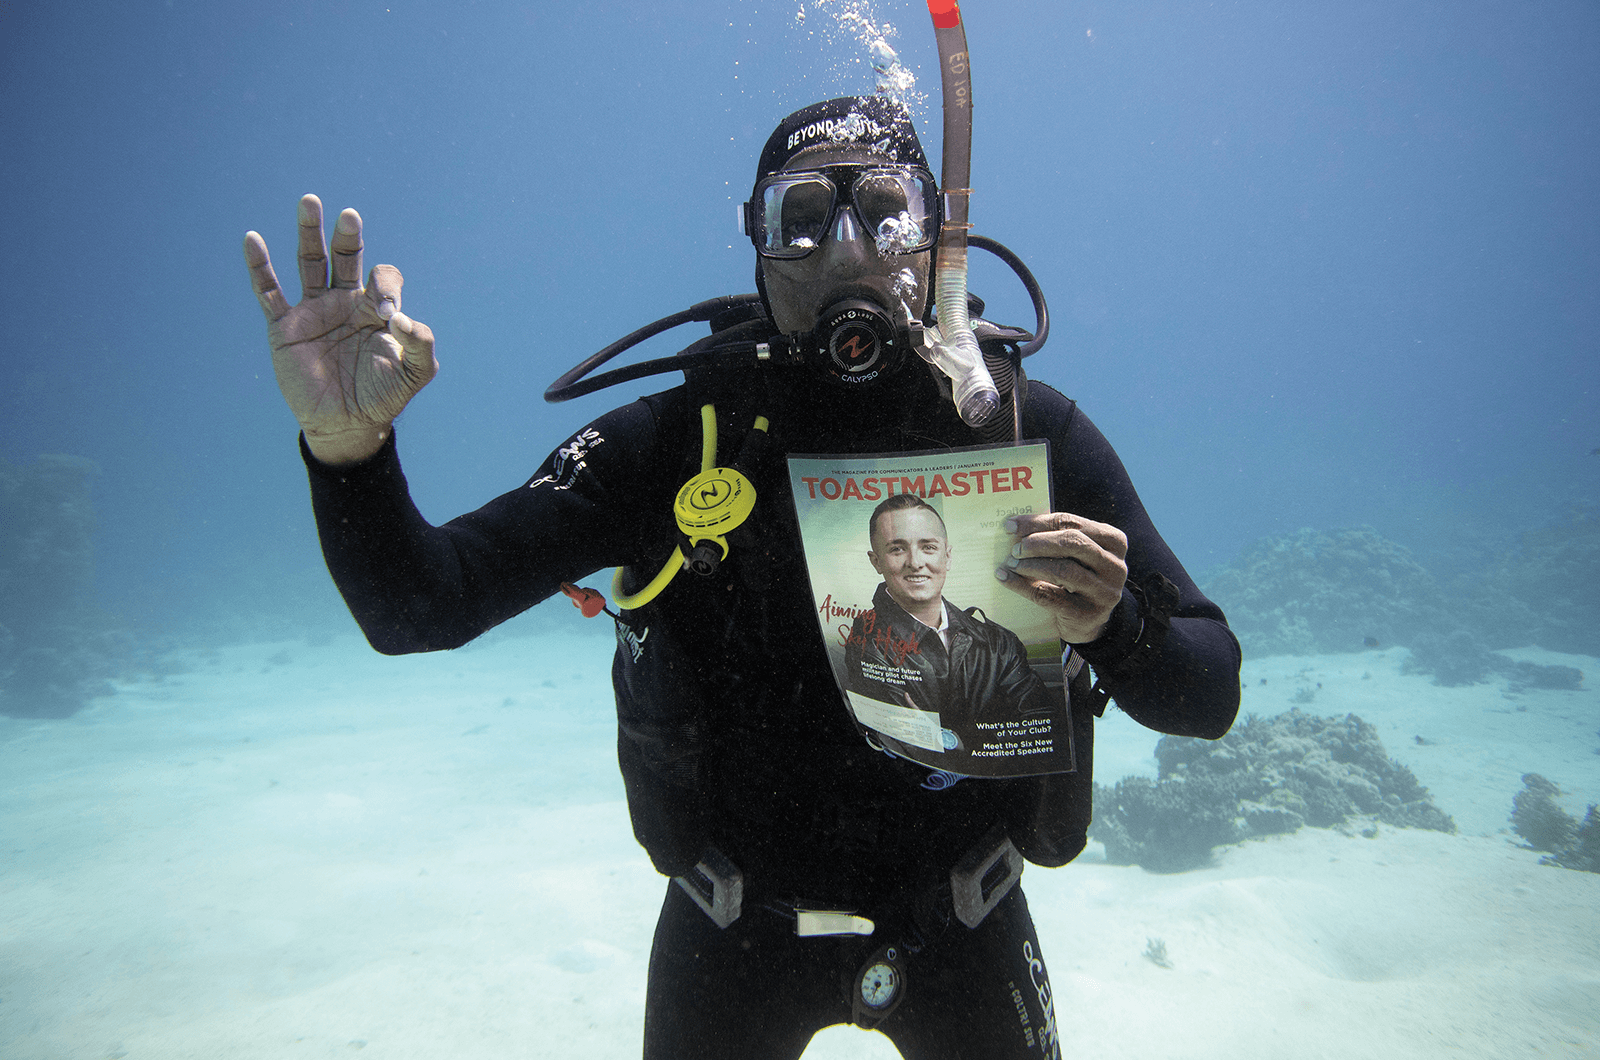 Agostinho Cajetan Barretto of Springfield Gardens, New York, takes his Toastmaster underwater while scuba diving in Sharm El Sheikh, Egypt. His hand sign is a universal scuba diving code informing those in the water that he is safe.